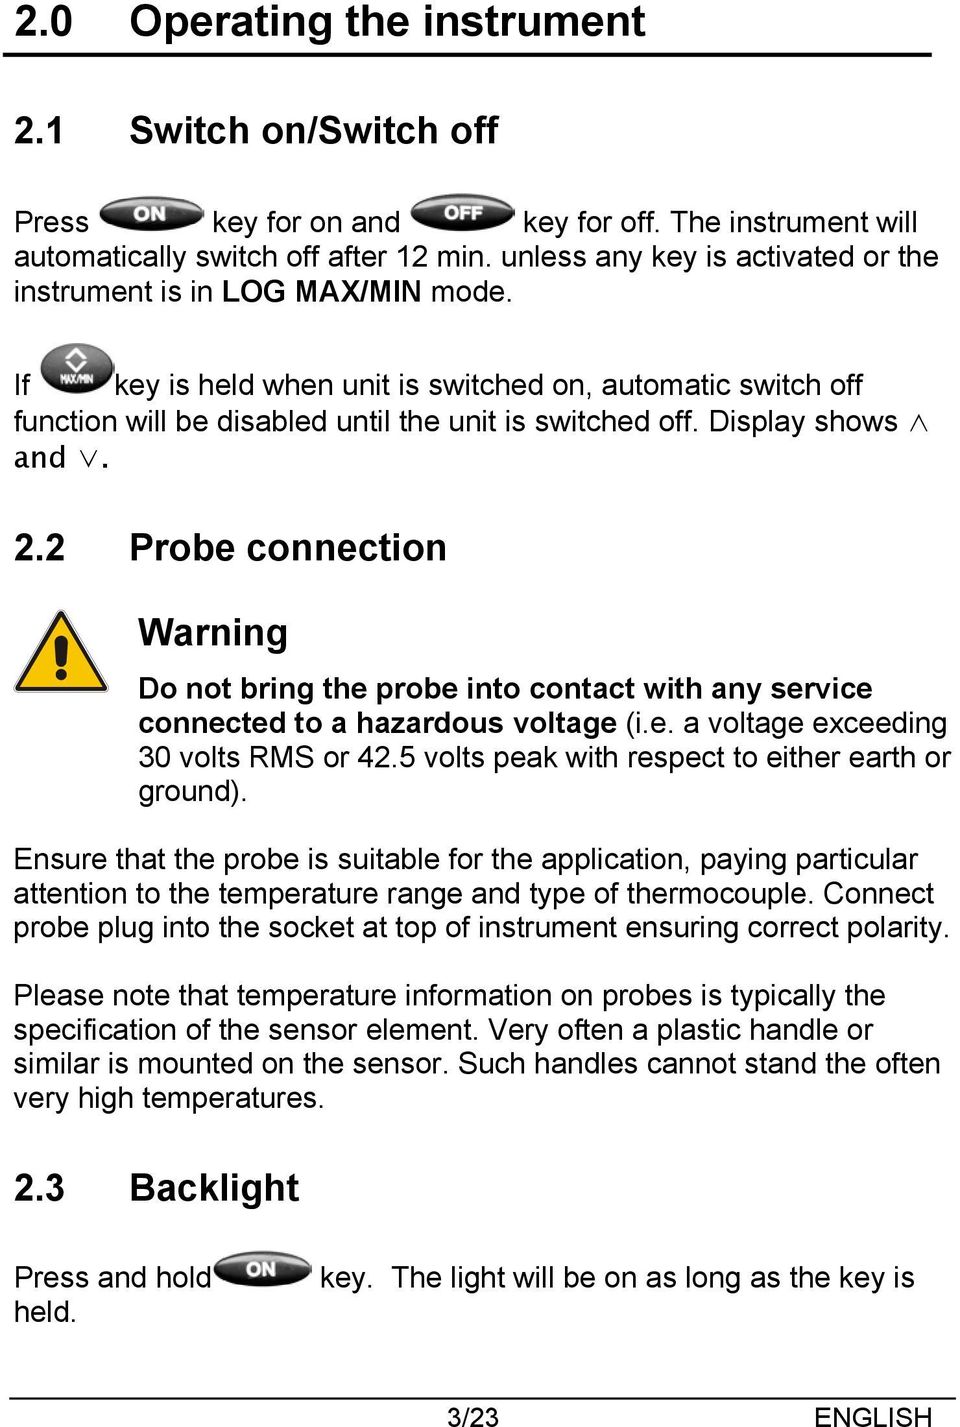 Display shows and. 2.2 Probe connection Warning Do not bring the probe into contact with any service connected to a hazardous voltage (i.e. a voltage exceeding 30 volts RMS or 42.